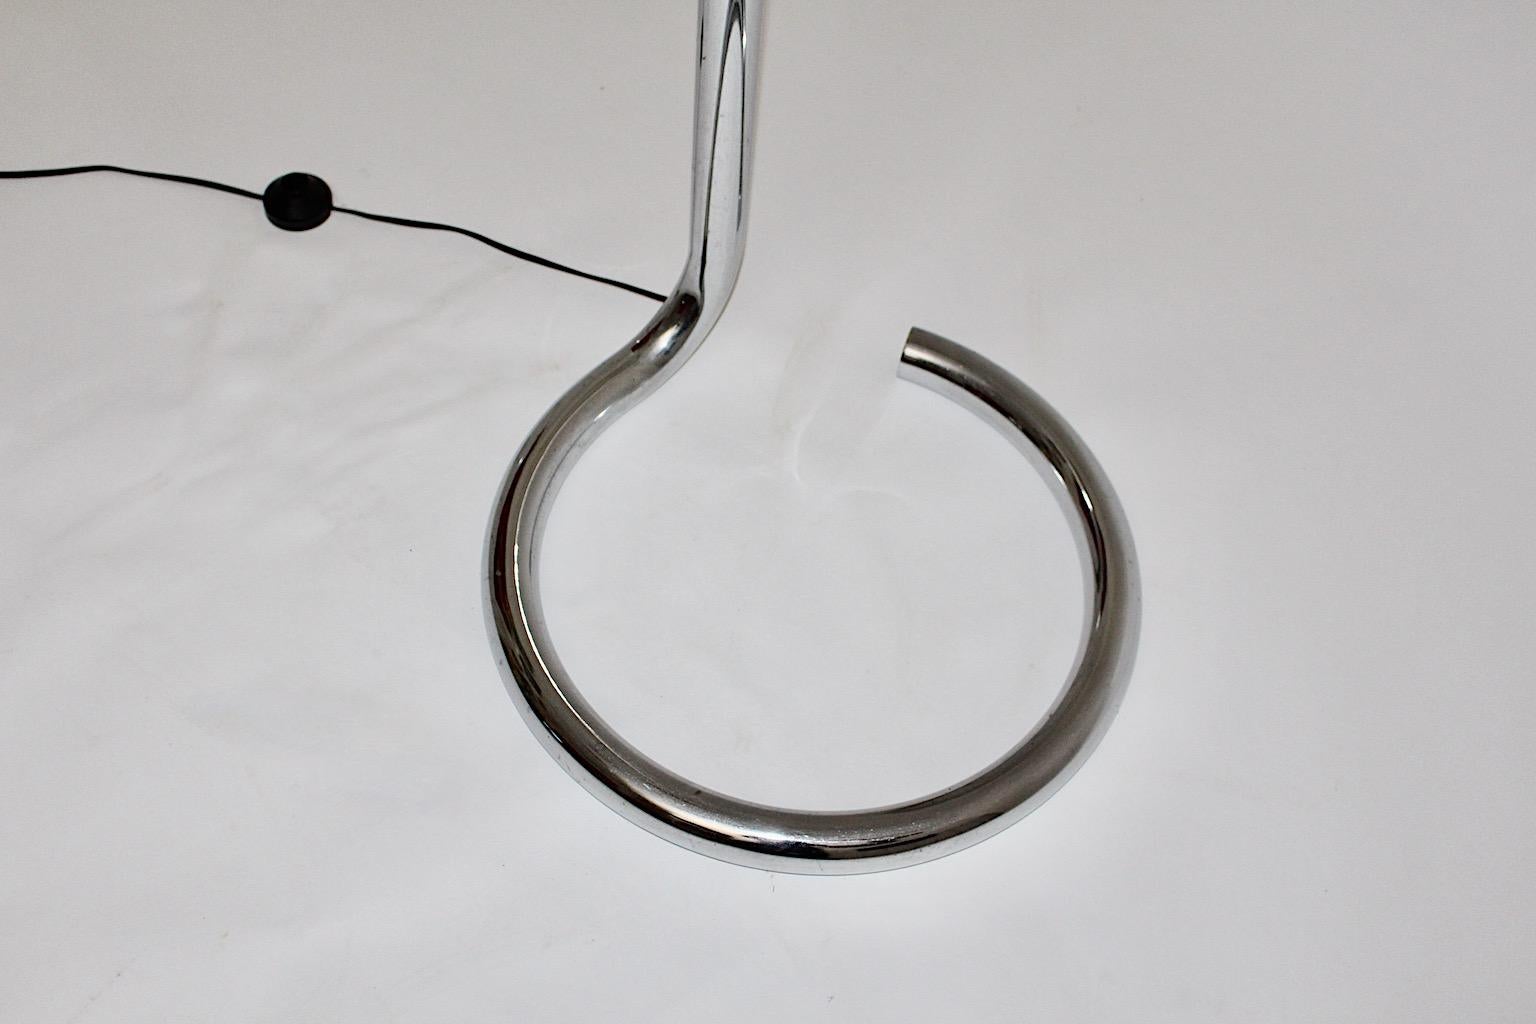 Mid-20th Century Space Age Vintage Chromed Metal Telescope Floor Lamp, 1960s, Germany For Sale